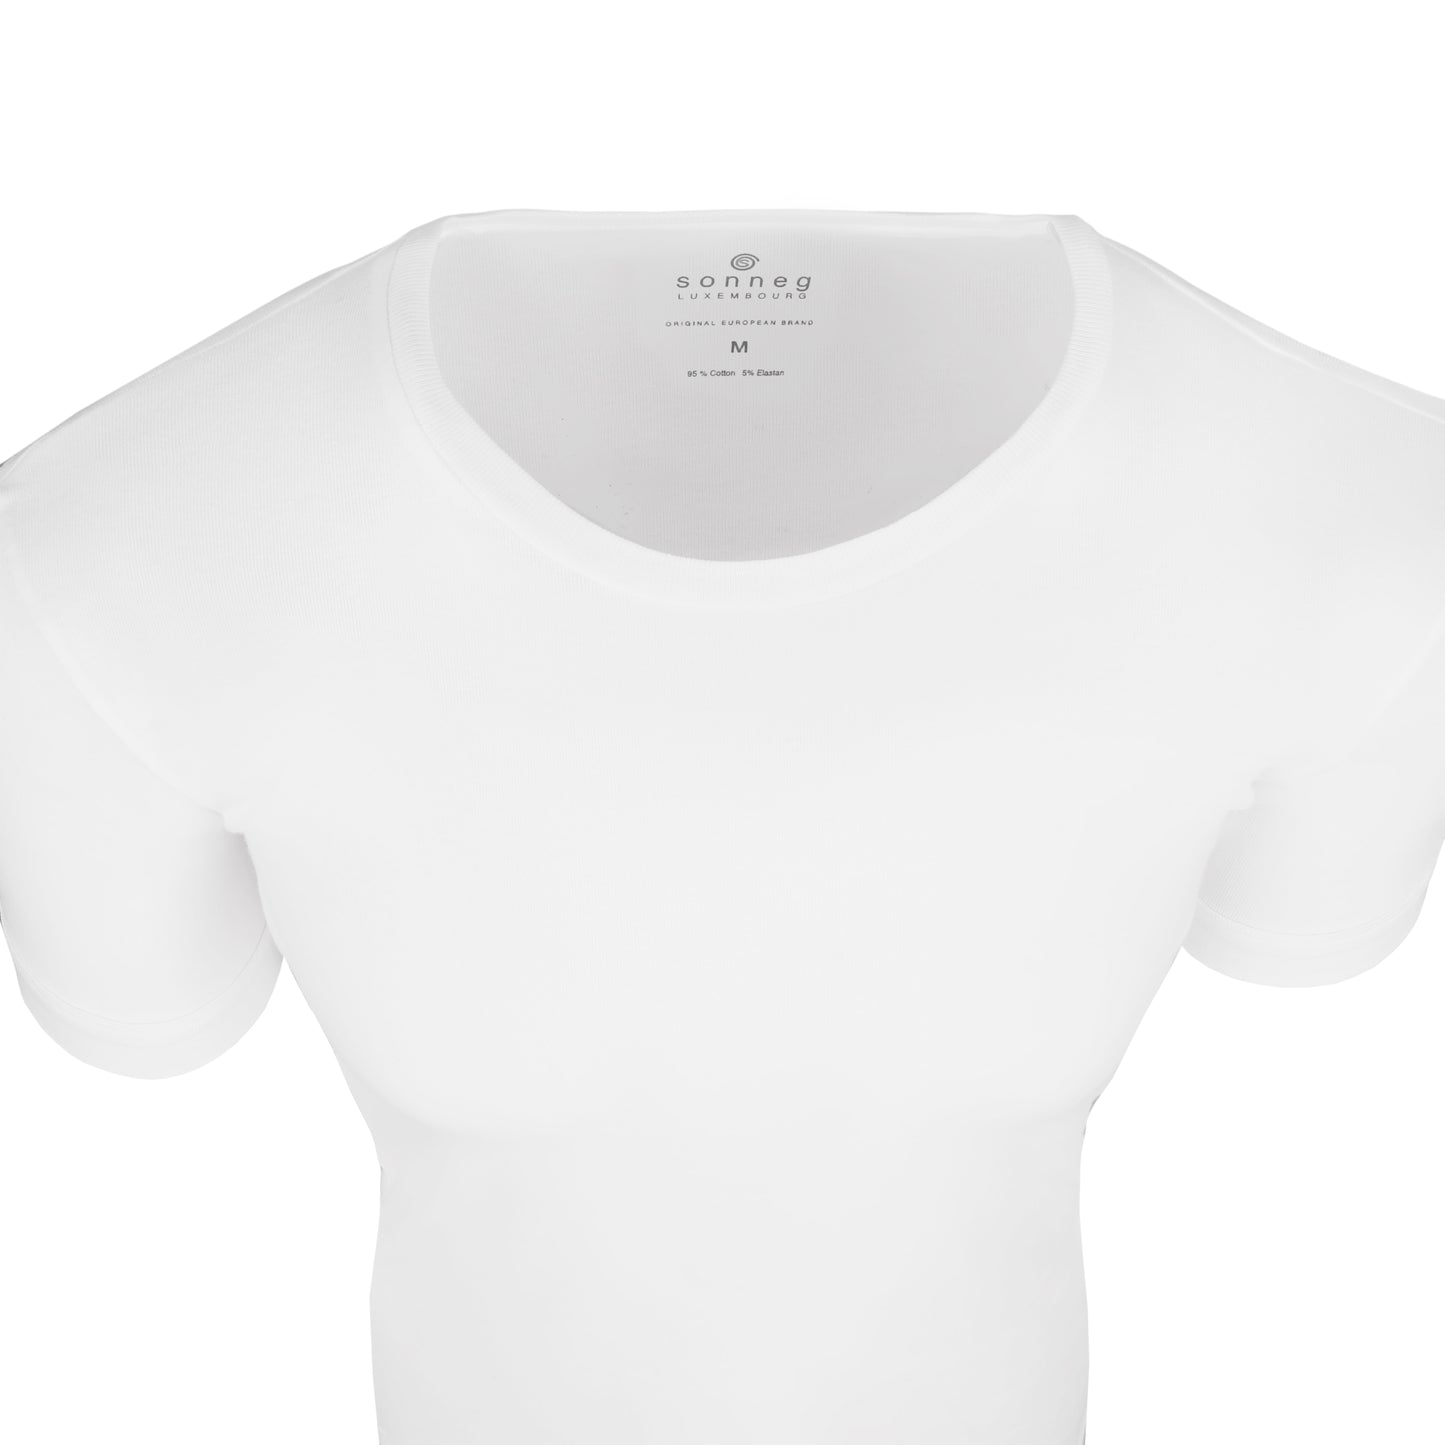 Round neck white T-shirt for men – pack of 2 or 4 tees